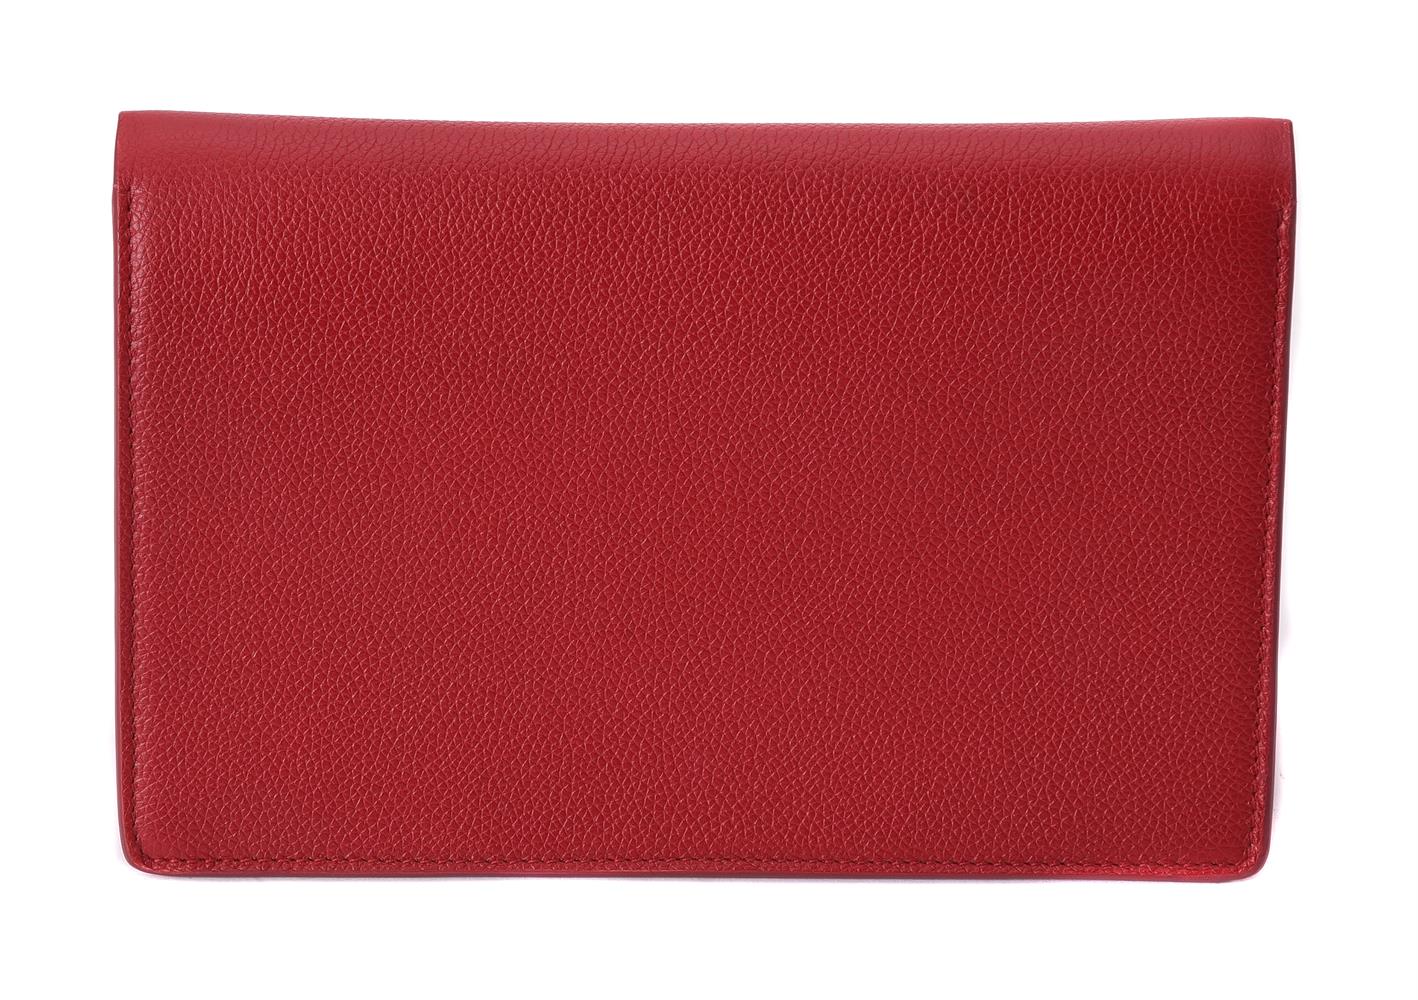 William & Son, Bruton clutch, a red leather handbag - Image 2 of 3